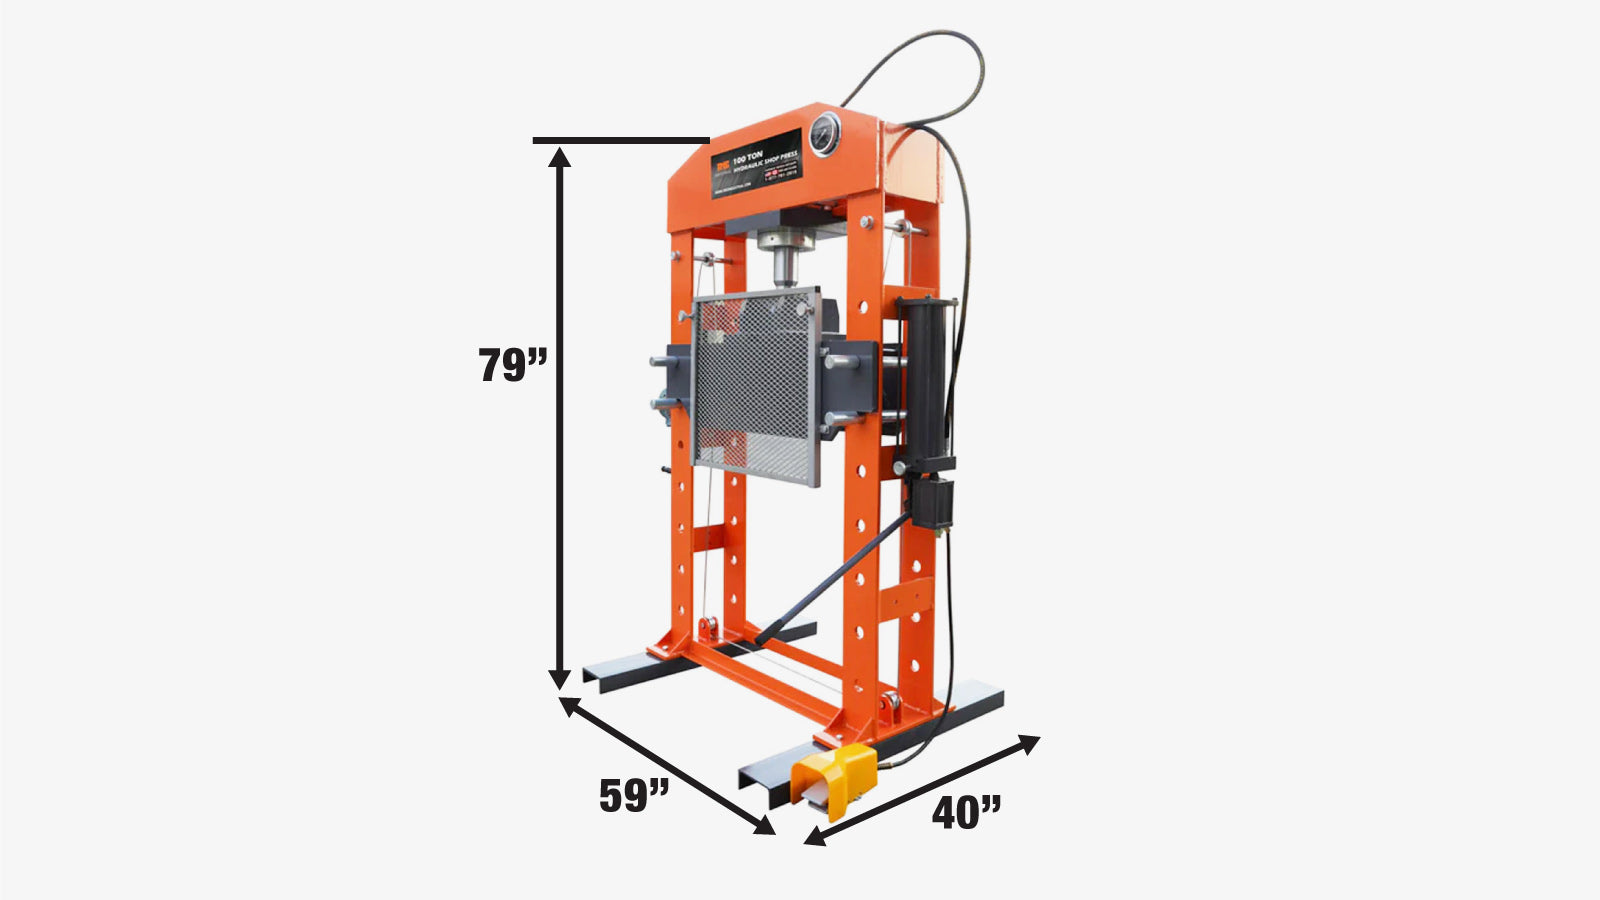 TMG Industrial 100 Ton Capacity Hydraulic Shop Press, Heavy Duty Pressing, Protective Grid Guard, Fully Welded H-Frame, Air & Manual Dual Operation, TMG-SP100-specifications-image